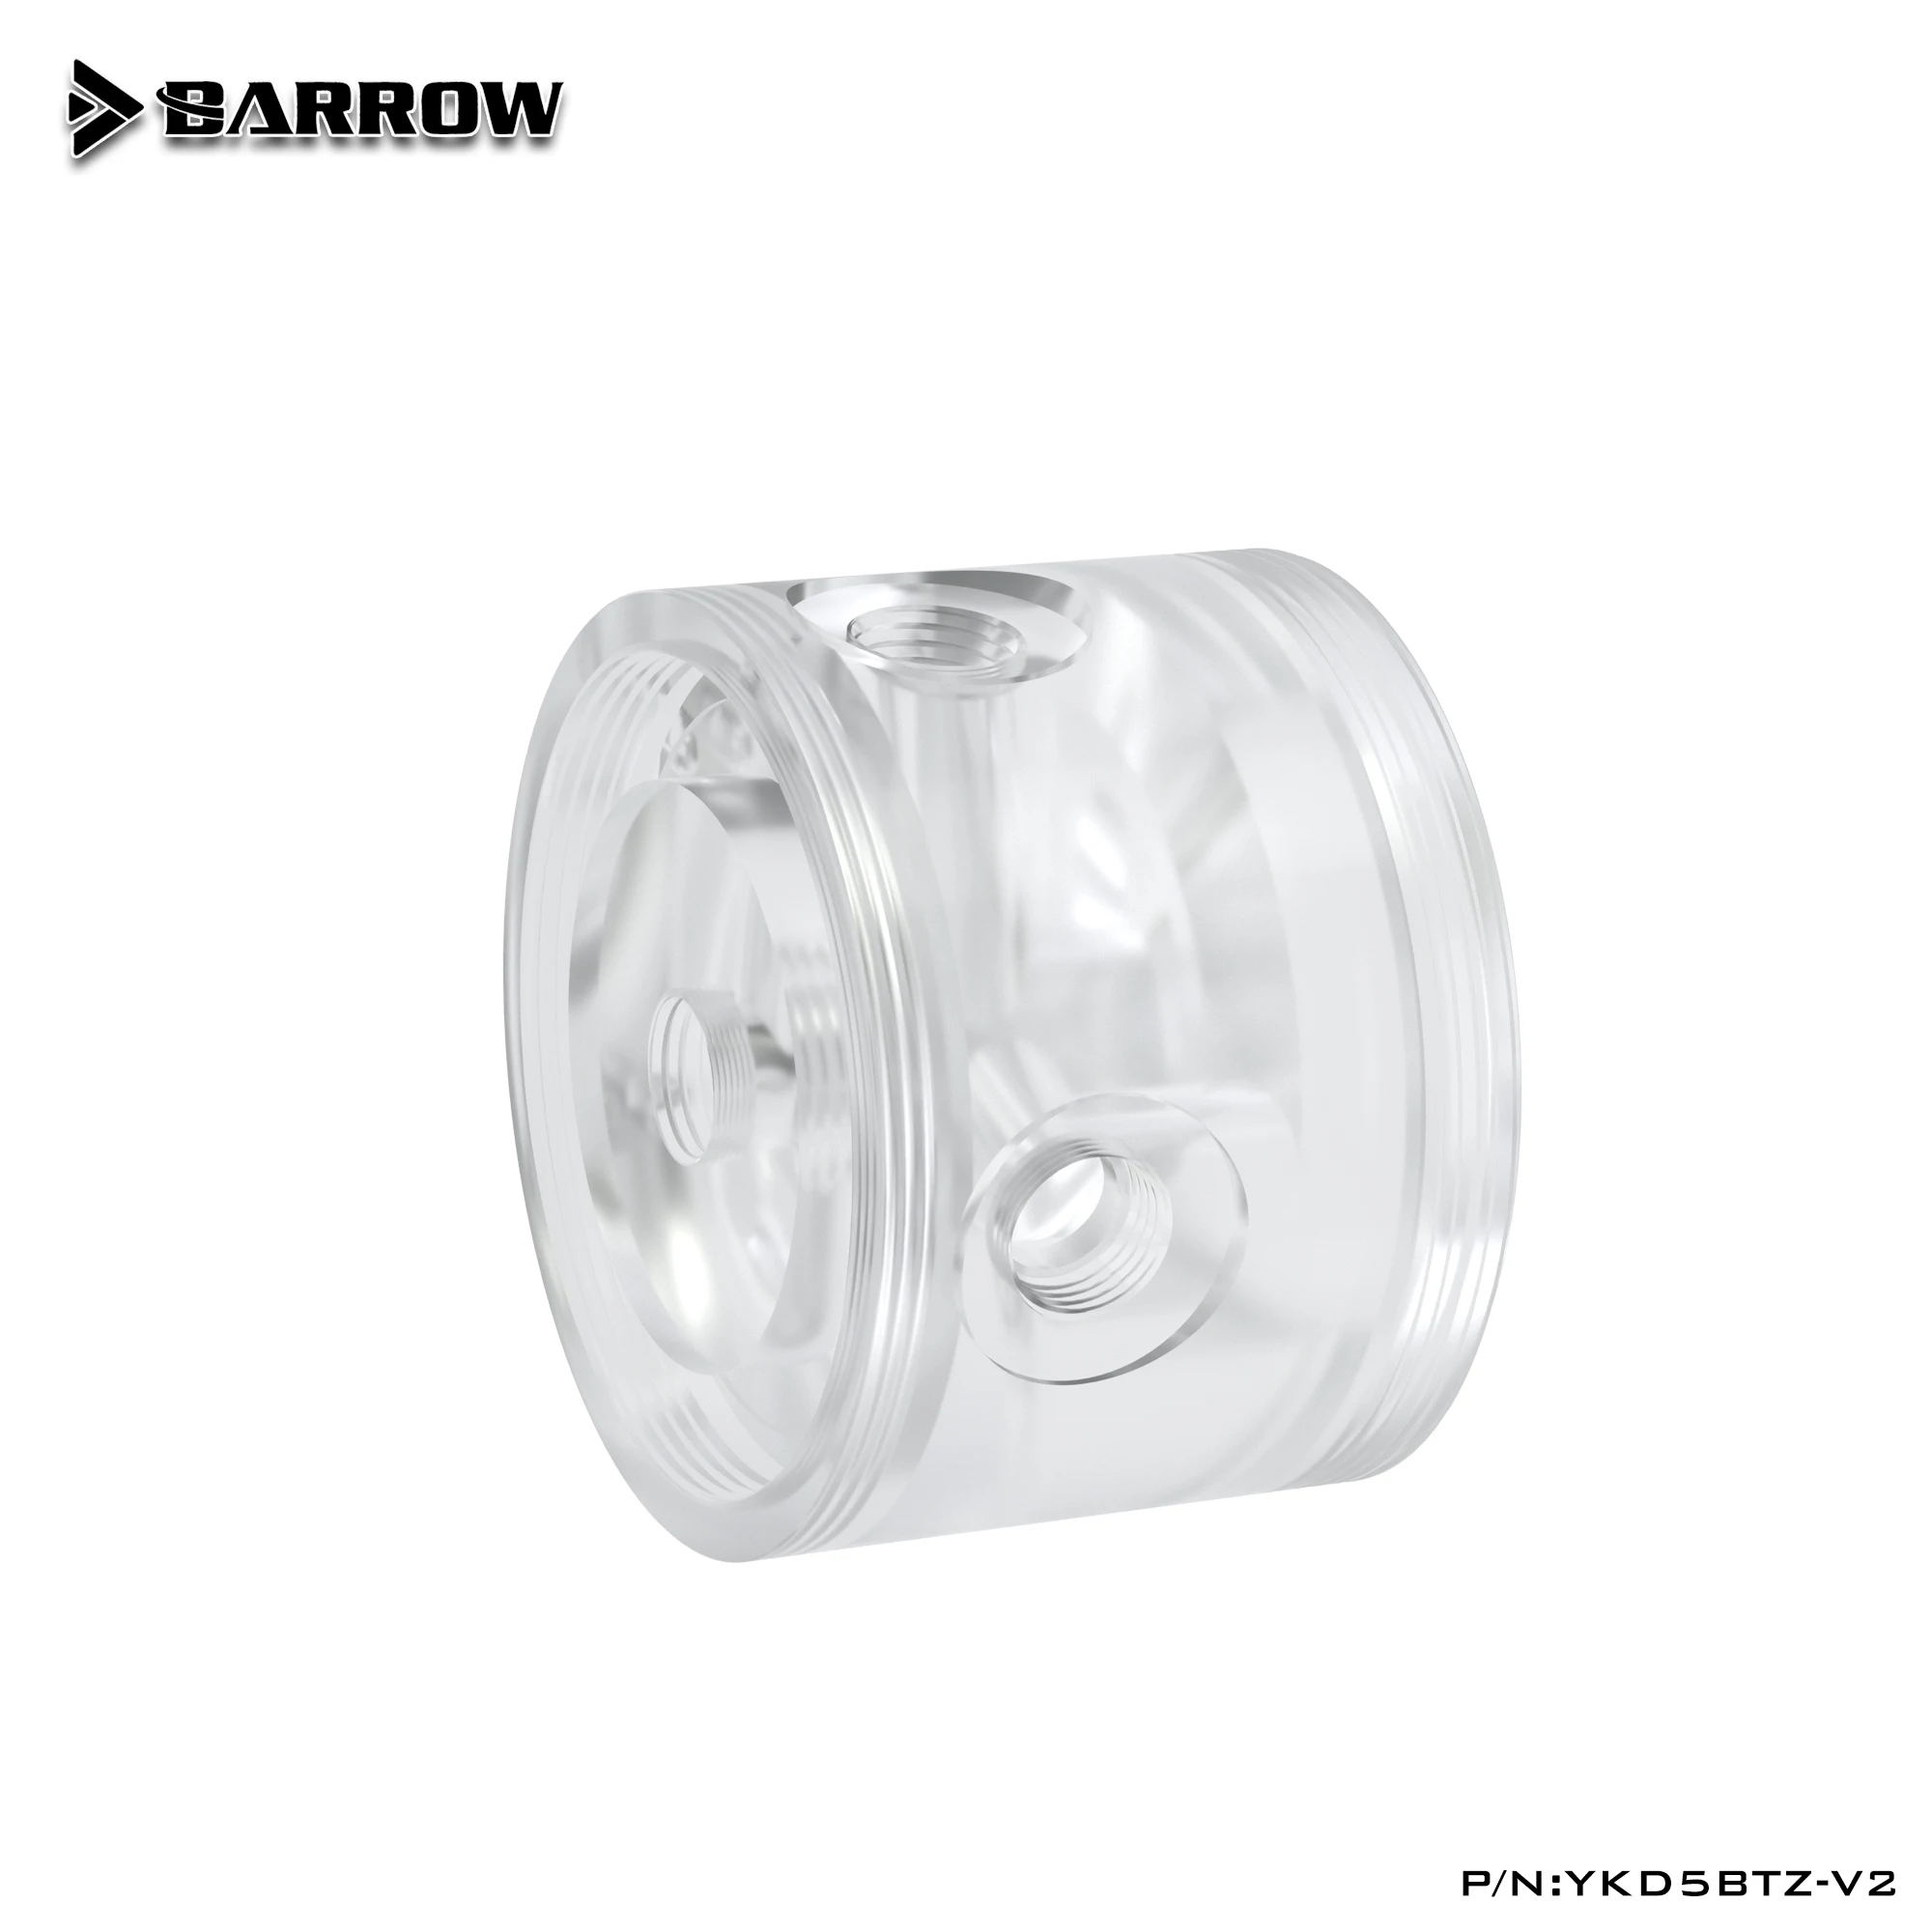 

Barrow YKD5BTZ-V2/PD5BTZ-V2 POM/PMMA Acrylic Water Pump Top For D5 / MCP655 Serise Pump Computer Water Cooling.